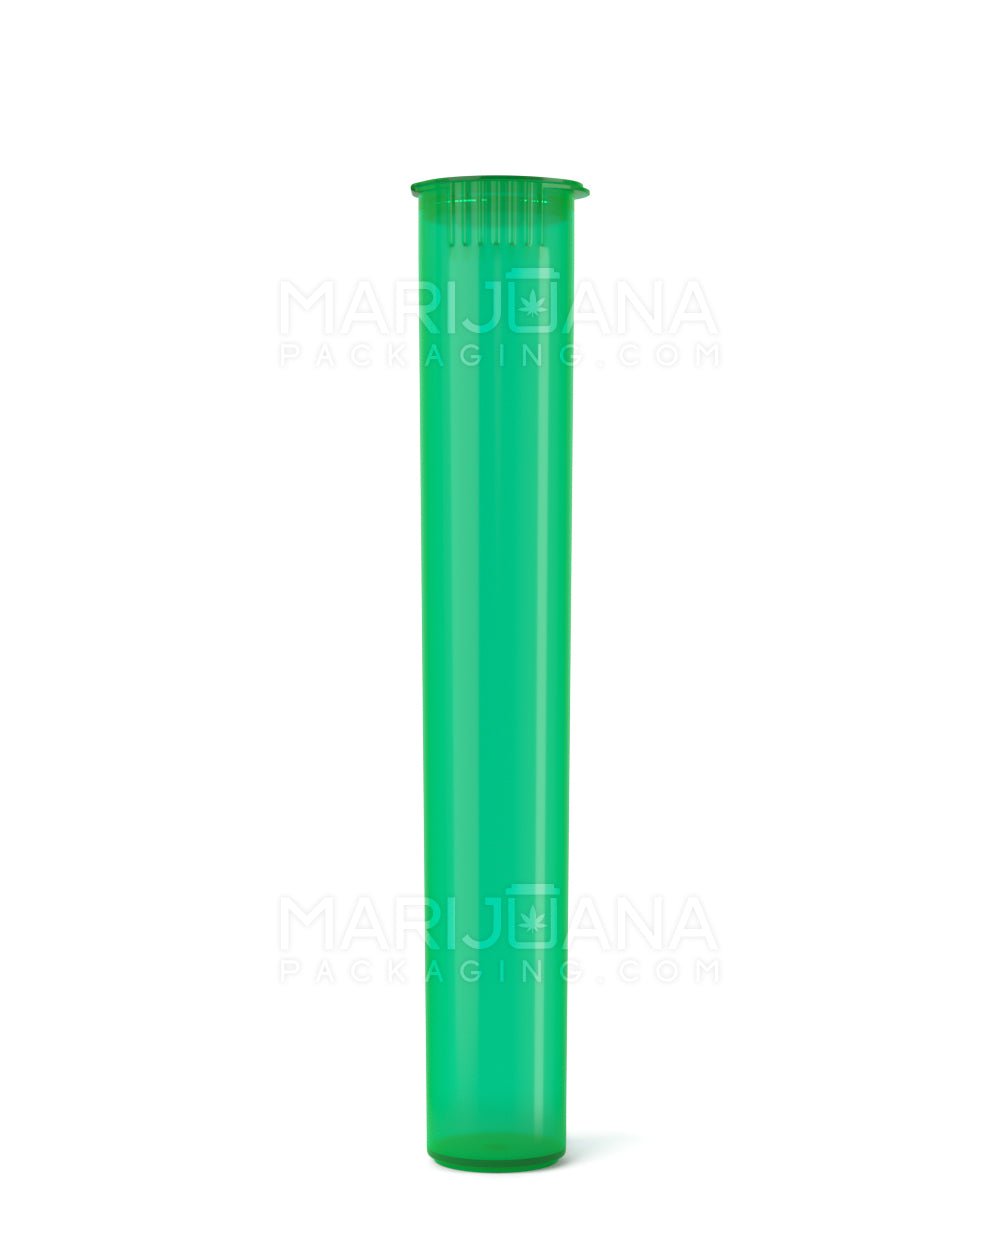 Child Resistant | King Size Pop Top Translucent Plastic Pre-Roll Tubes | 116mm - Green - 1000 Count - 2